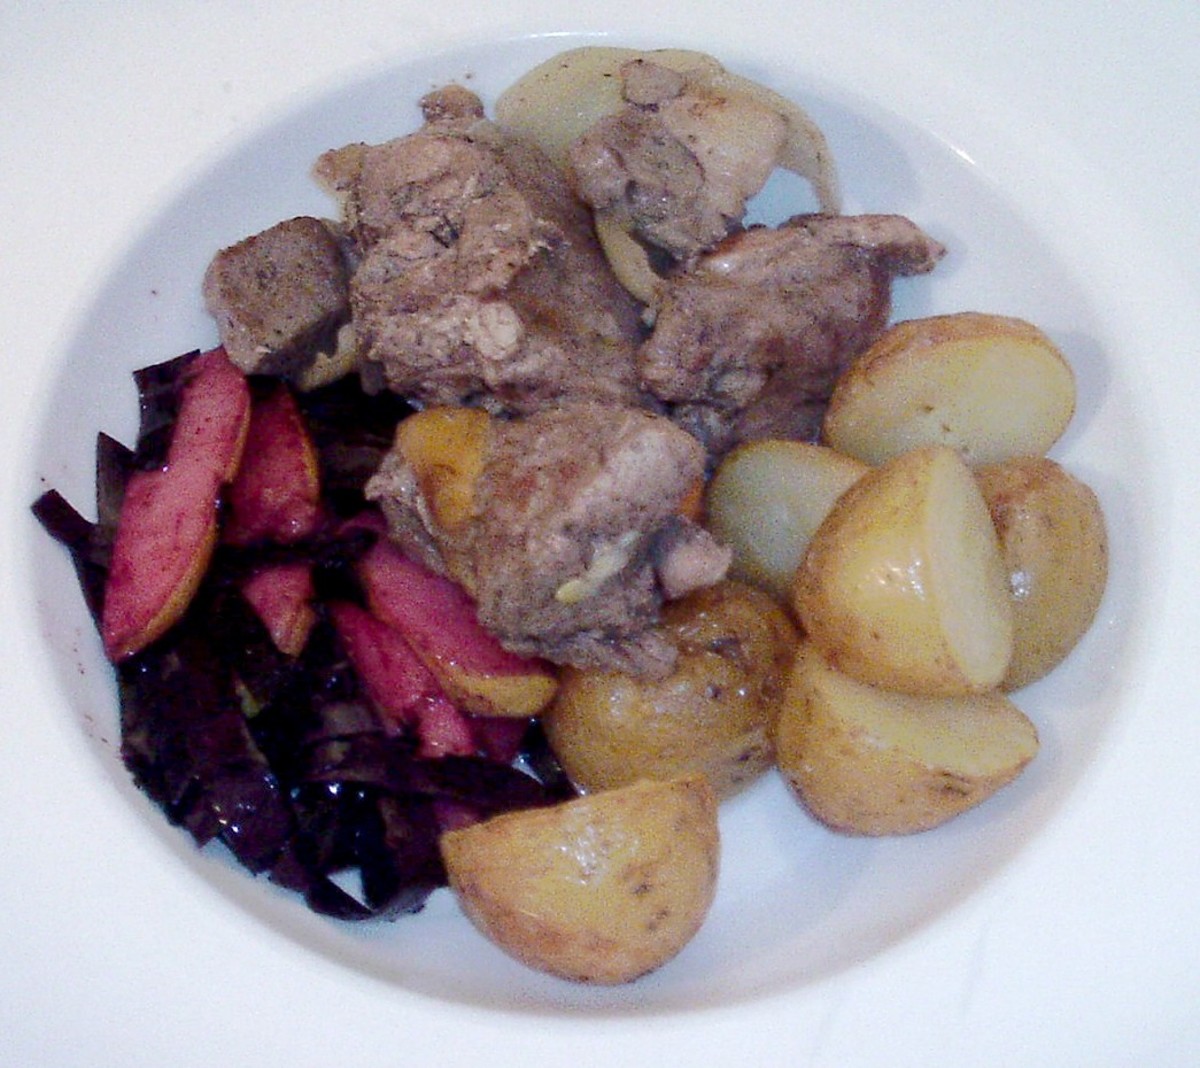 Pheasant and lamb stew is plated with roast potatoes, red cabbage and pear.